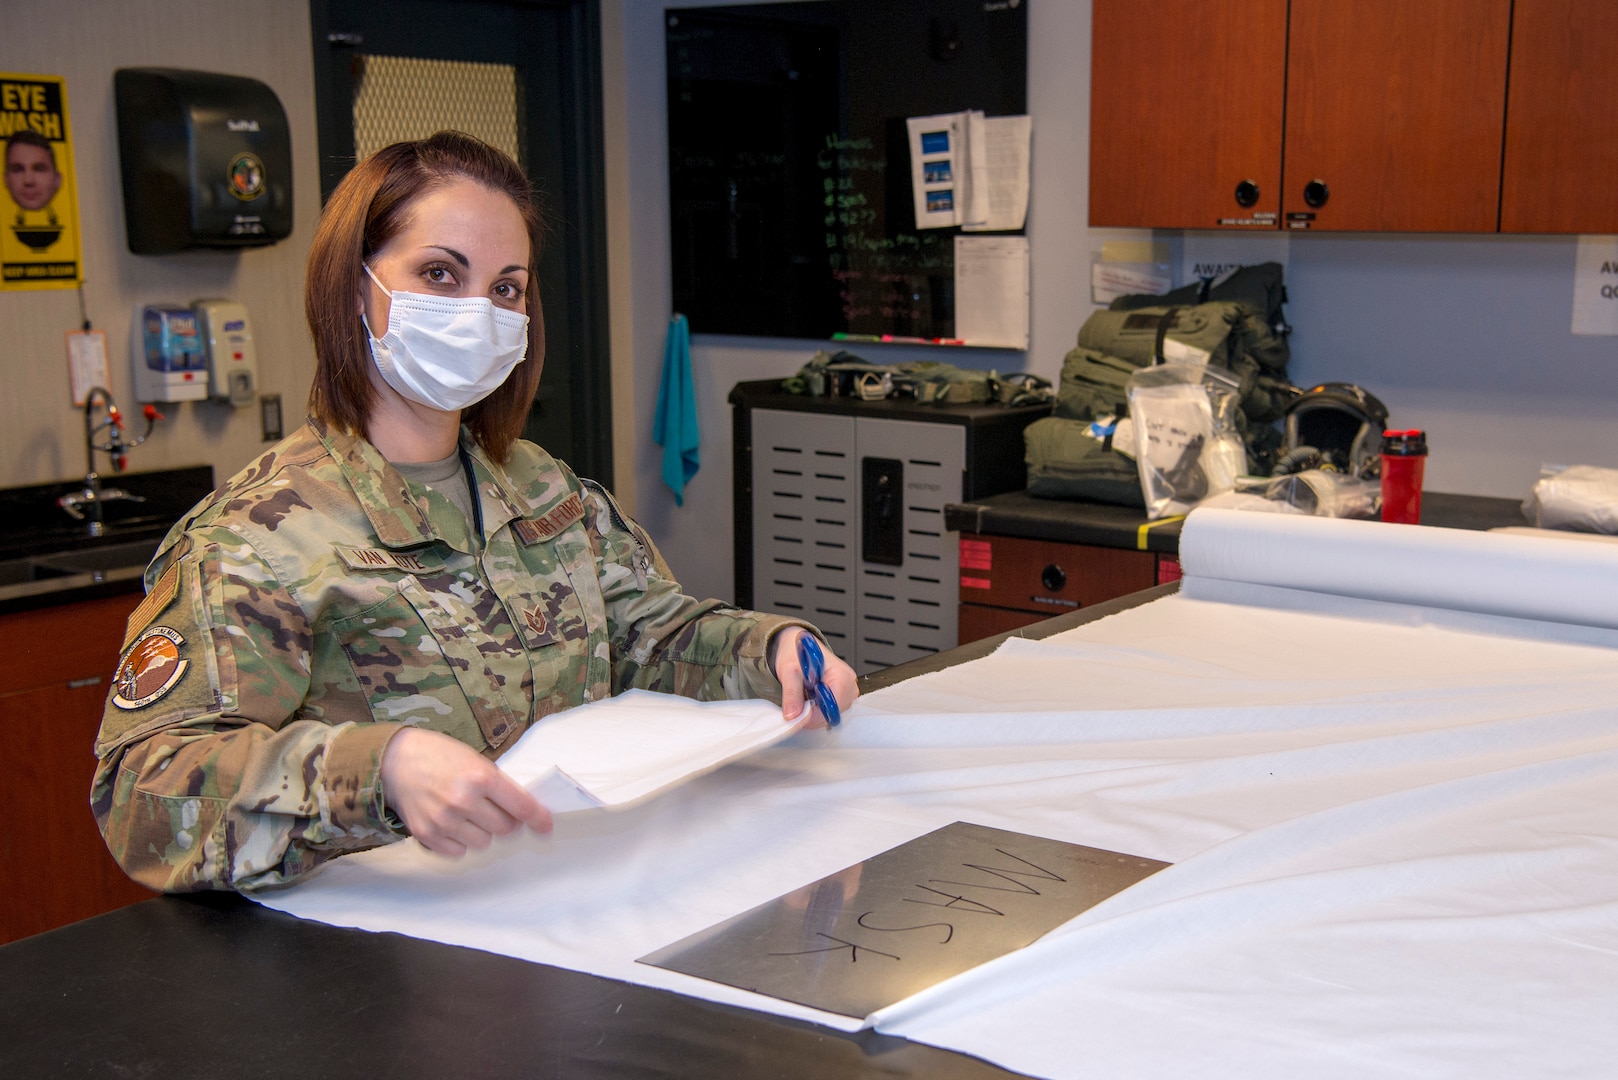 Tech. Sgt. Jennifer Van Note, an aircrew flight equipment specialist with the 140th Wing, Colorado National Guard at Buckley Air Force Base, Colorado, says she is proud to help make face masks for the community.